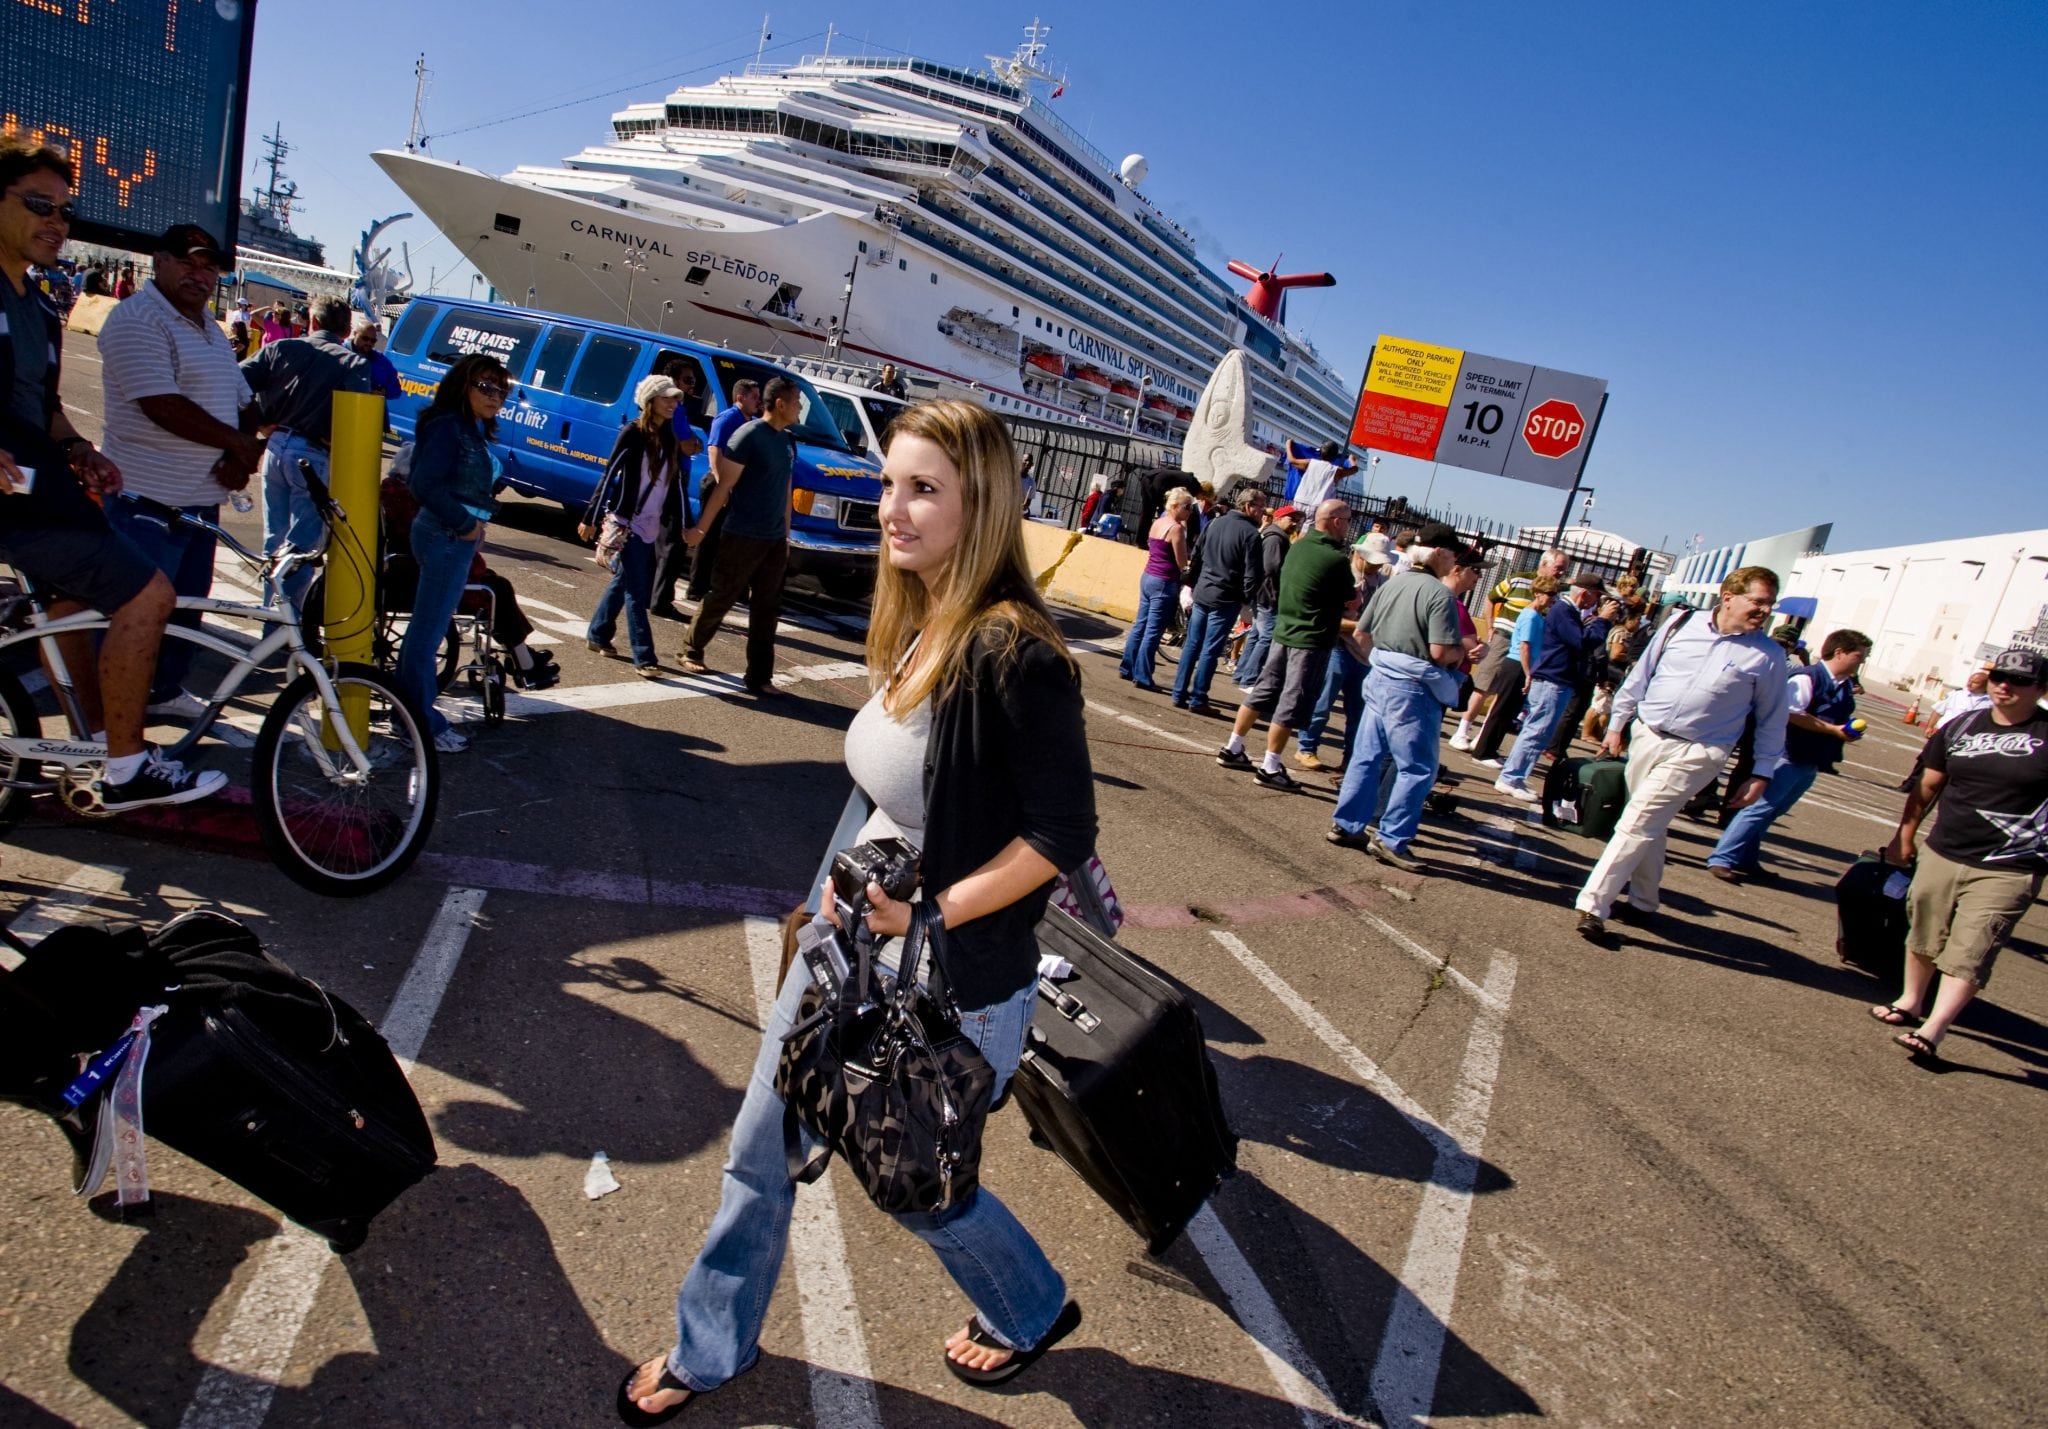 Carnival Cruise Line's string of incidents dates back to the Carnival Splendor breakdown off the Mexican Riviera in late 2010. Here passengers hurry to transportation after the ship limped into San Diego Harbor. 